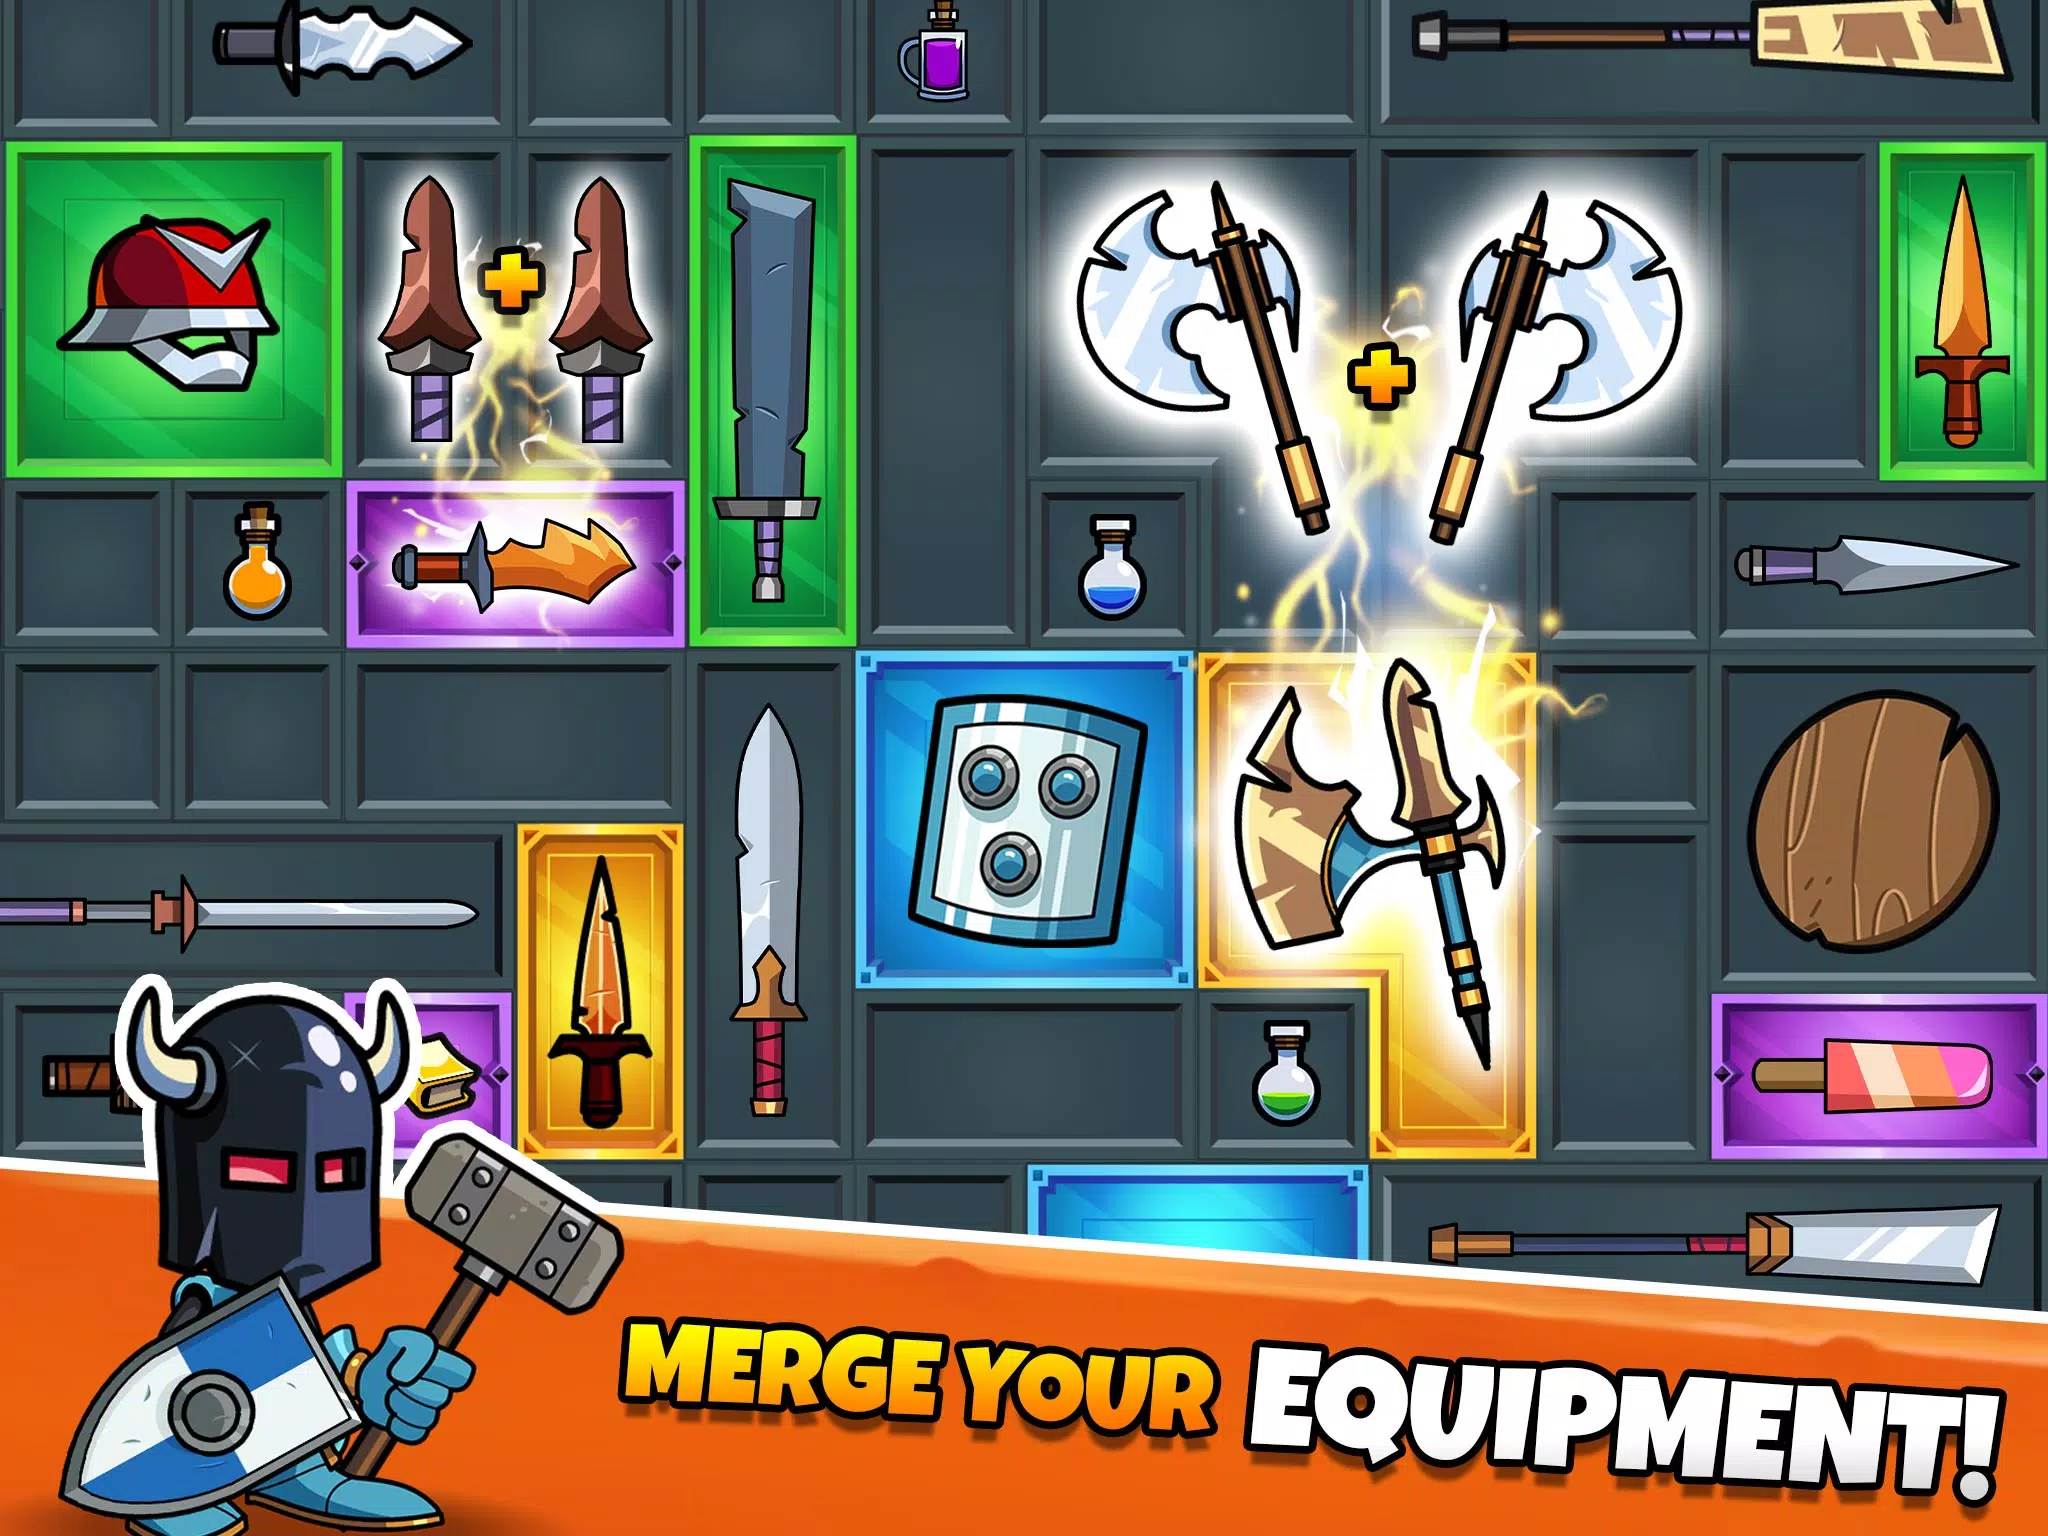 Overloaded Mod apk [Unlocked] download - Overloaded MOD apk 1.3.5 free for  Android.